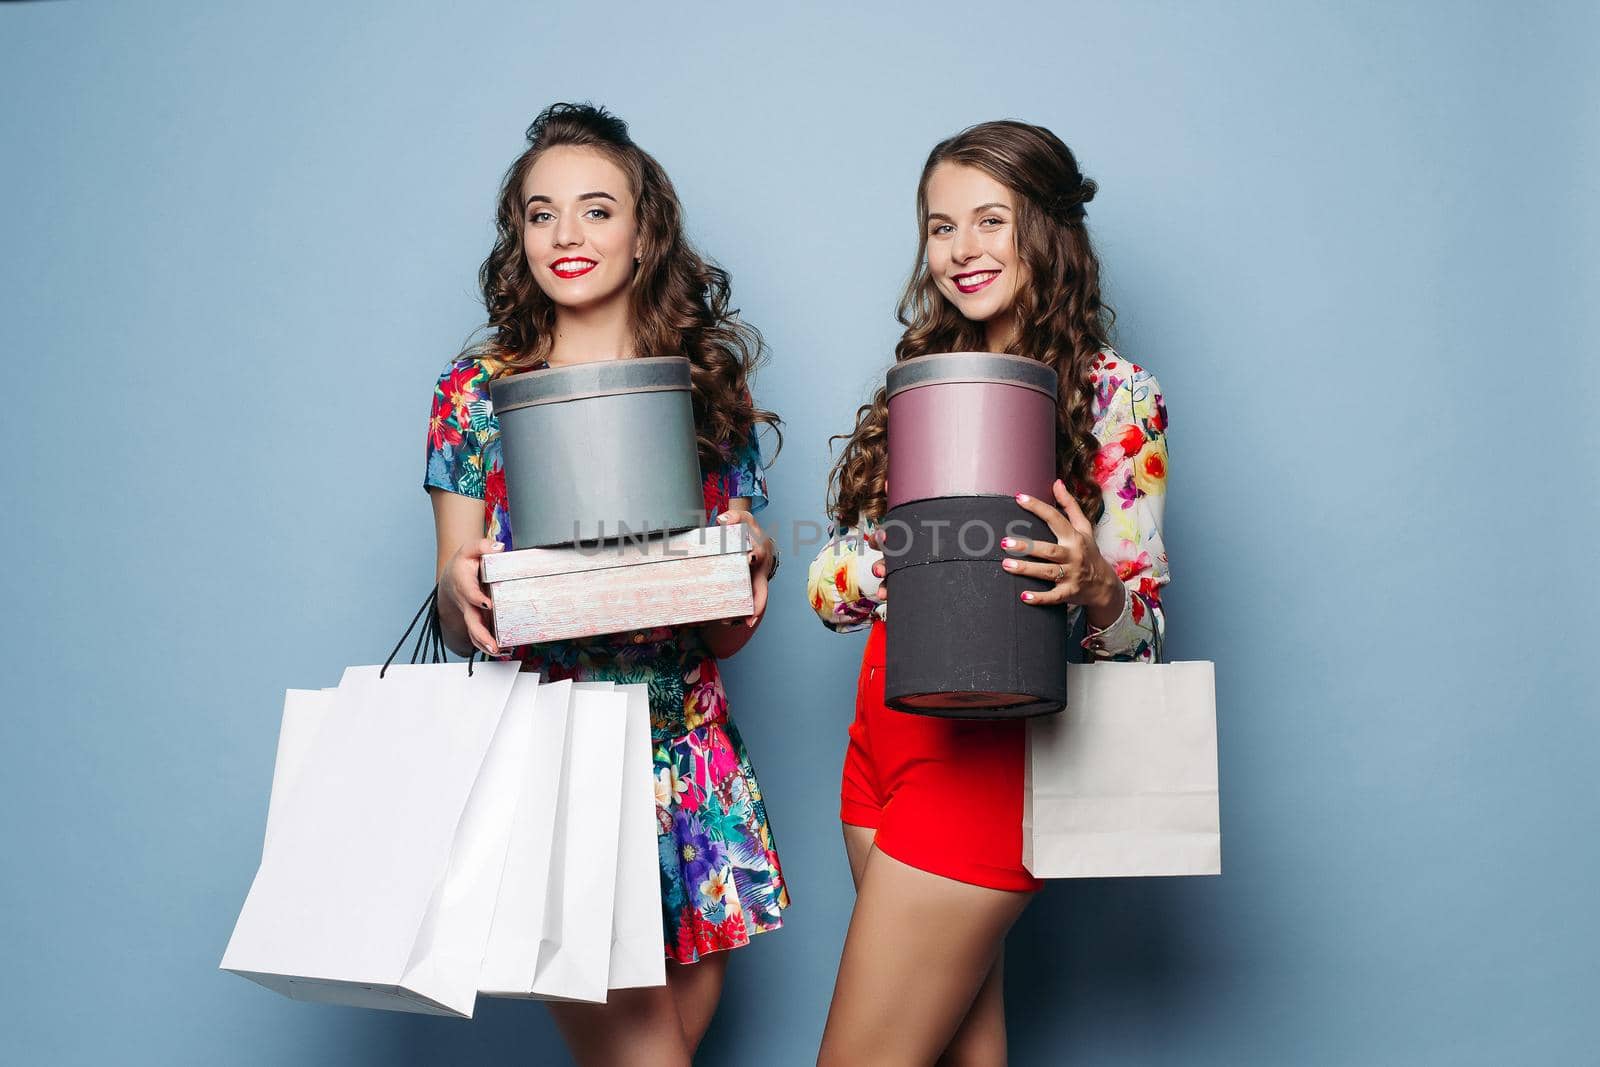 Portrait of beautiful brunette ladies with hairstyles in trendy clothes holding hat bags and shopping bags over blue backgroud. Smiling at camera.